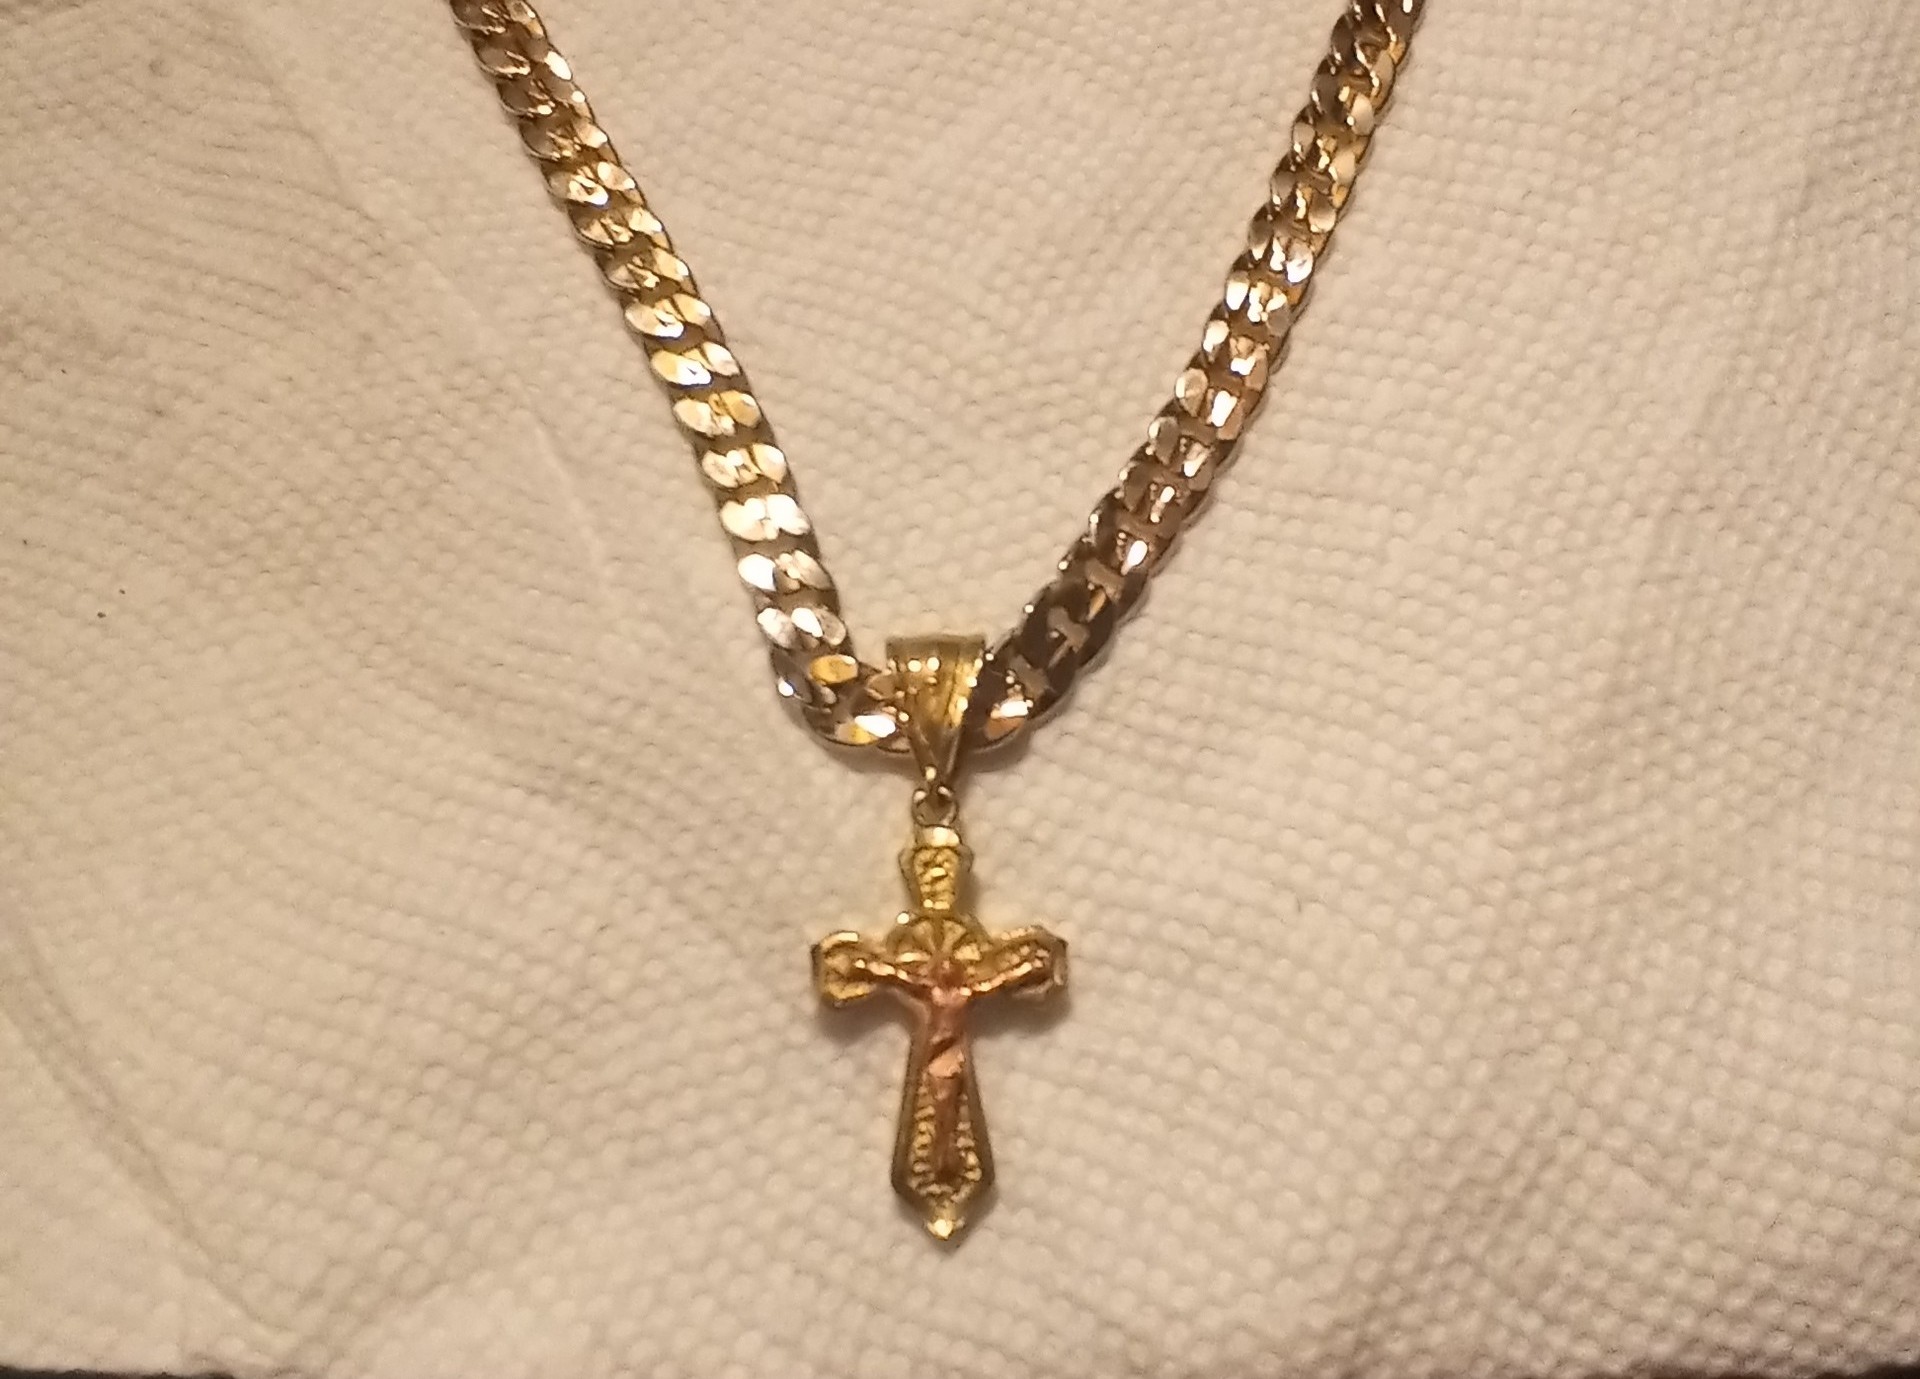 18-Inch Hamilton Gold Plated Necklace with 6mm Emerald Birthstone Beads and Gold Filled Loop Cross Charm. 